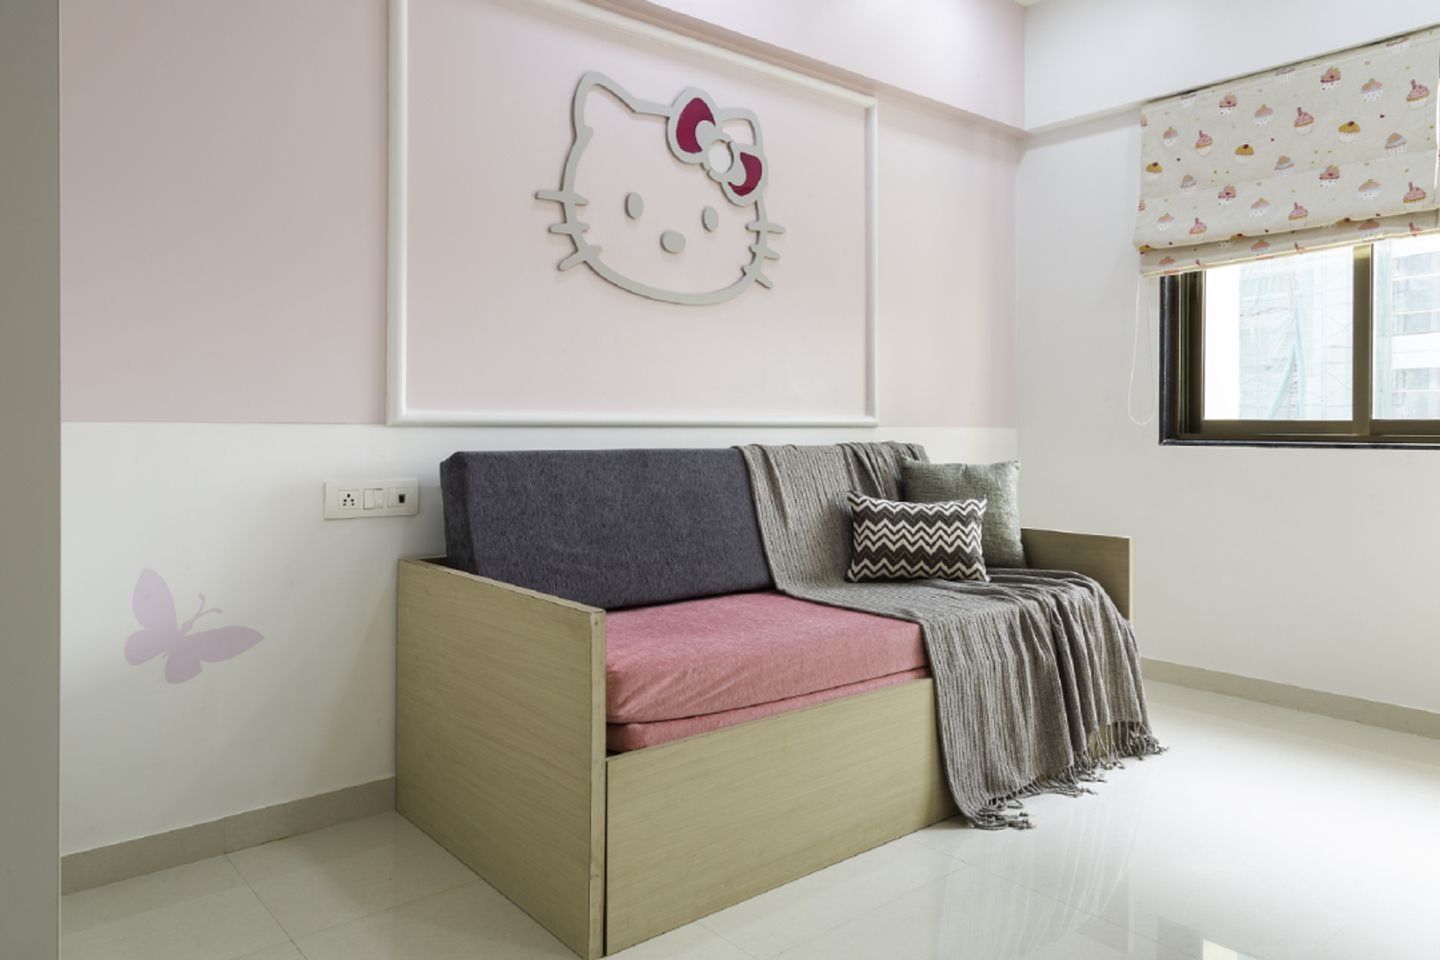 12x10 Ft Kids Room Design With Sofa Cum Bed Made Of Wood - Livspace